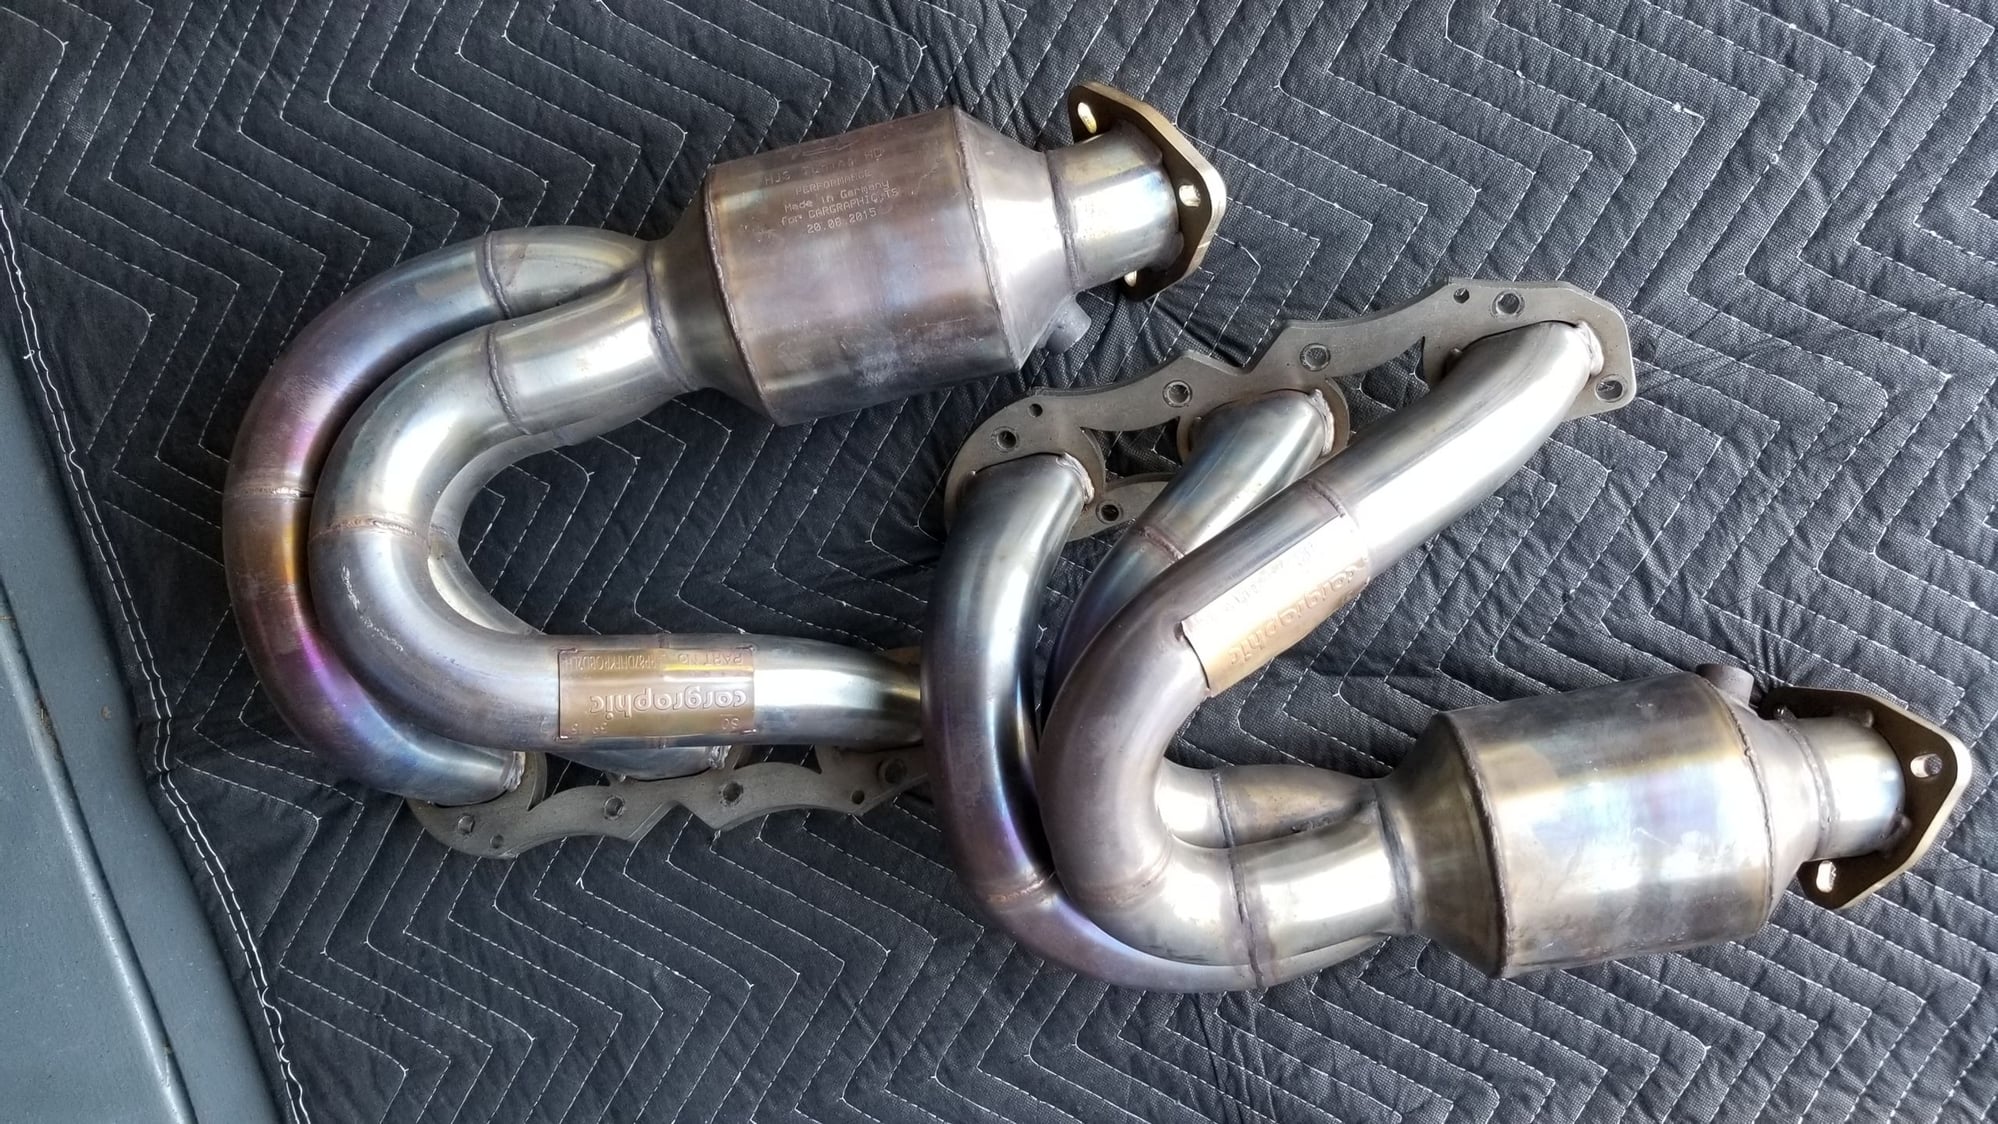 Engine - Exhaust - Cargraphic 987.2/986.2 DFI NewGen Long Tube Headers HJS 200 cell sport cats Exc Cond - Used - 2009 to 2012 Porsche Boxster - 2009 to 2012 Porsche Cayman - Corte Madera, CA 94925, United States